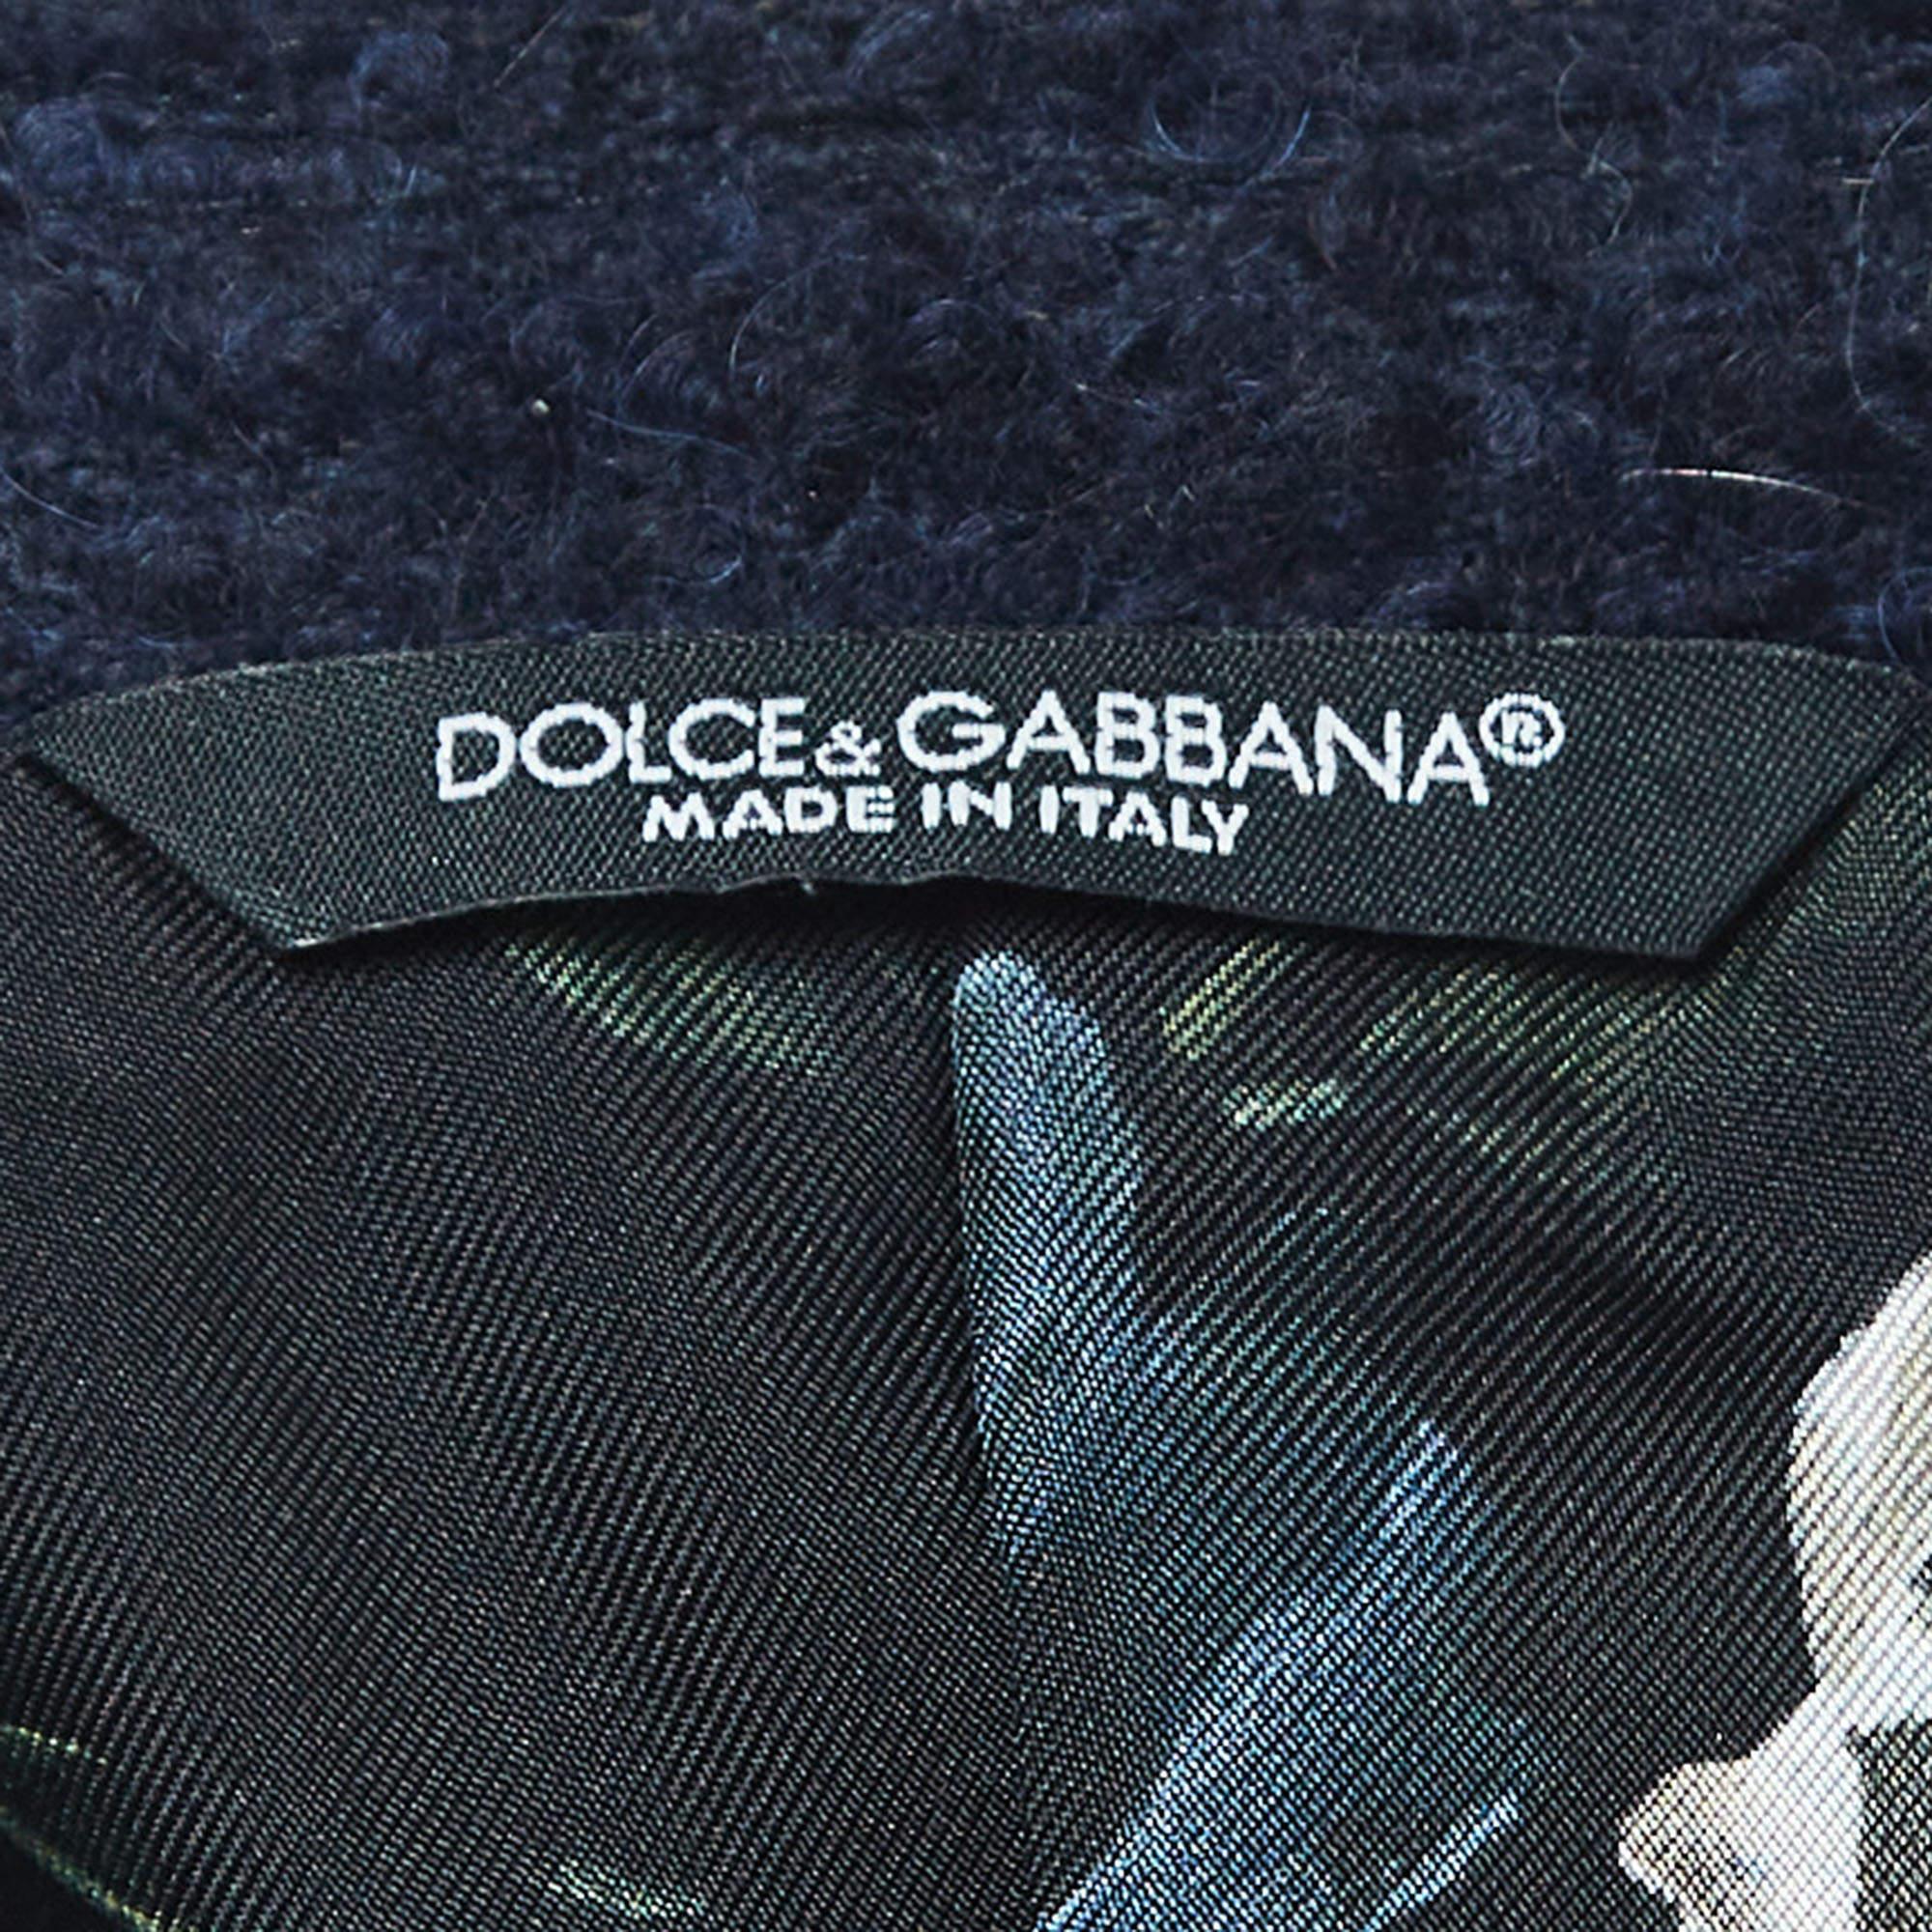 Women's Dolce & Gabbana Navy Blue Logo Embroidered Tweed Double Breasted Coat M